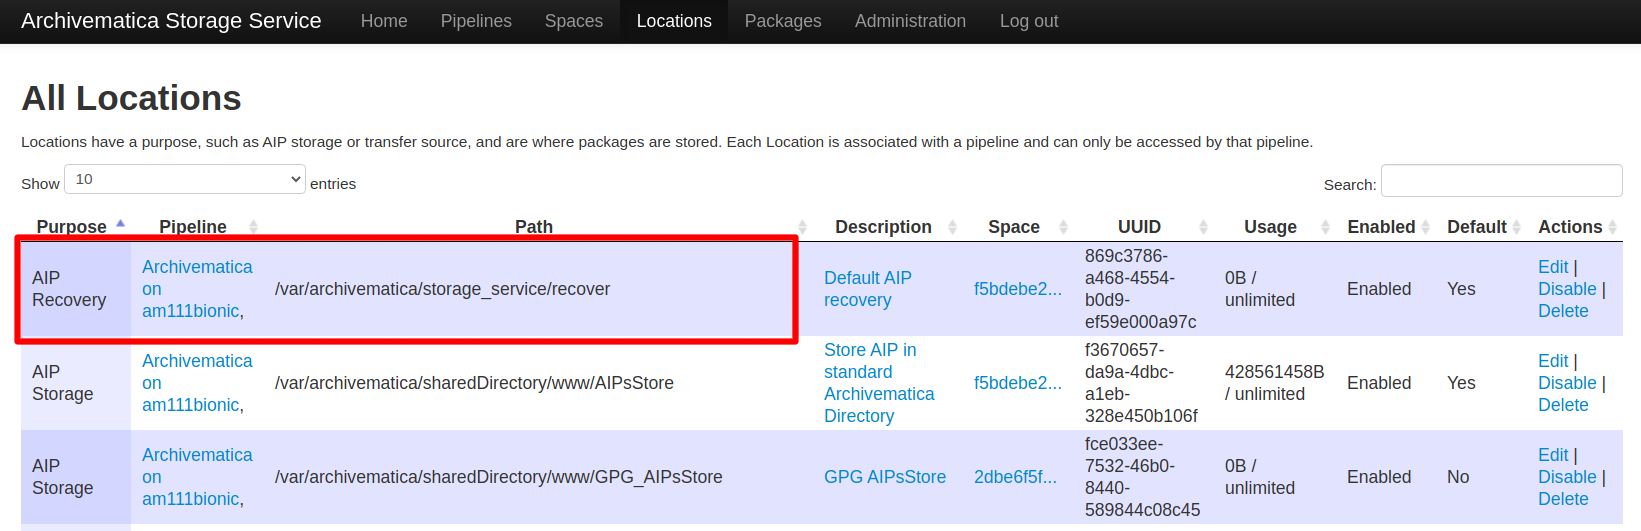 The Locations tab has a table with all Storage Service locations listed. The AIP recovery location has the purpose "AIP Recovery" in the first column.